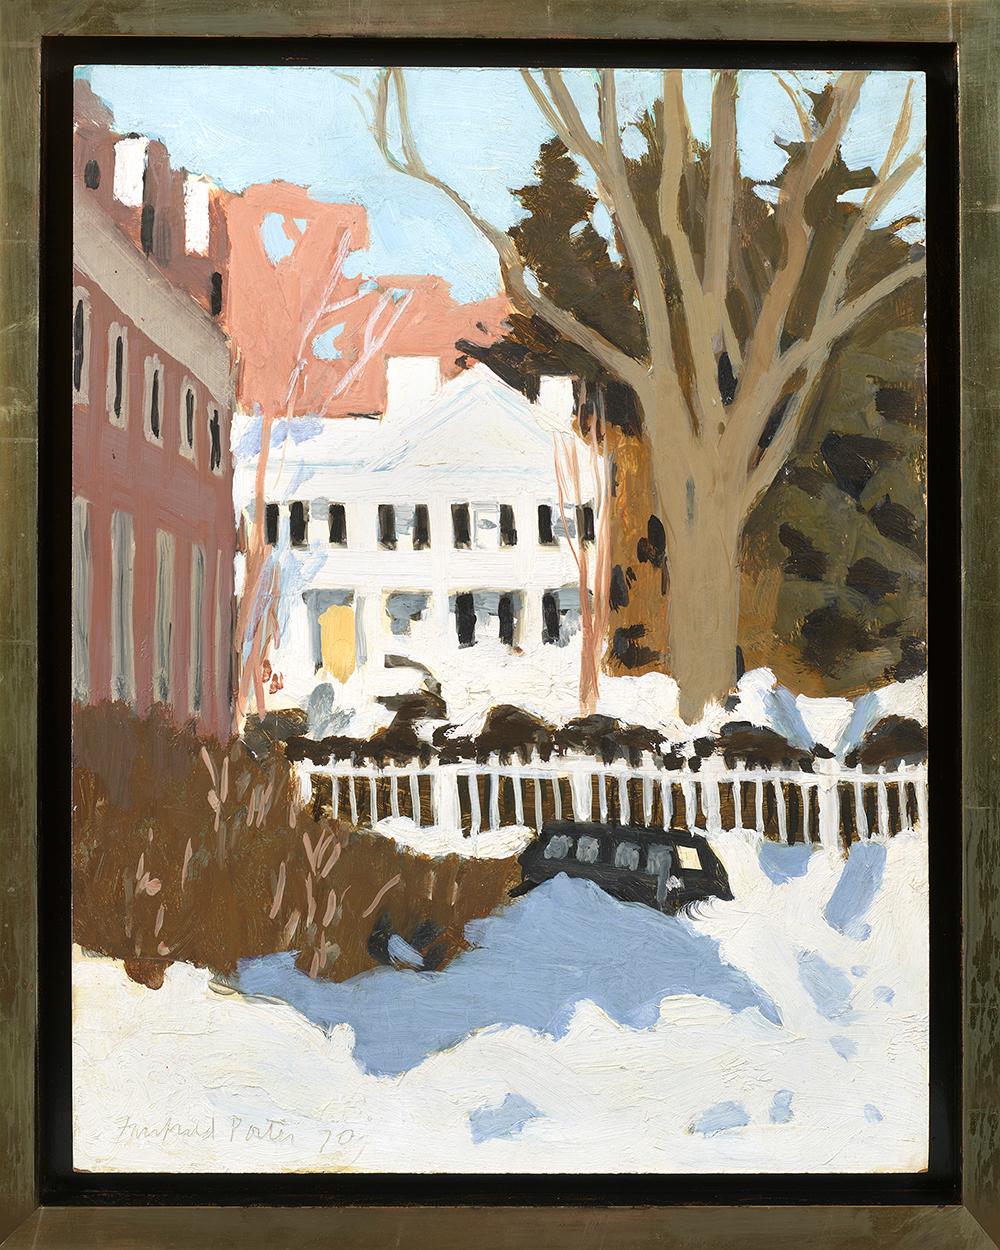 Oreton Clark House, Amherst College, 1970 - Painting by Fairfield Porter